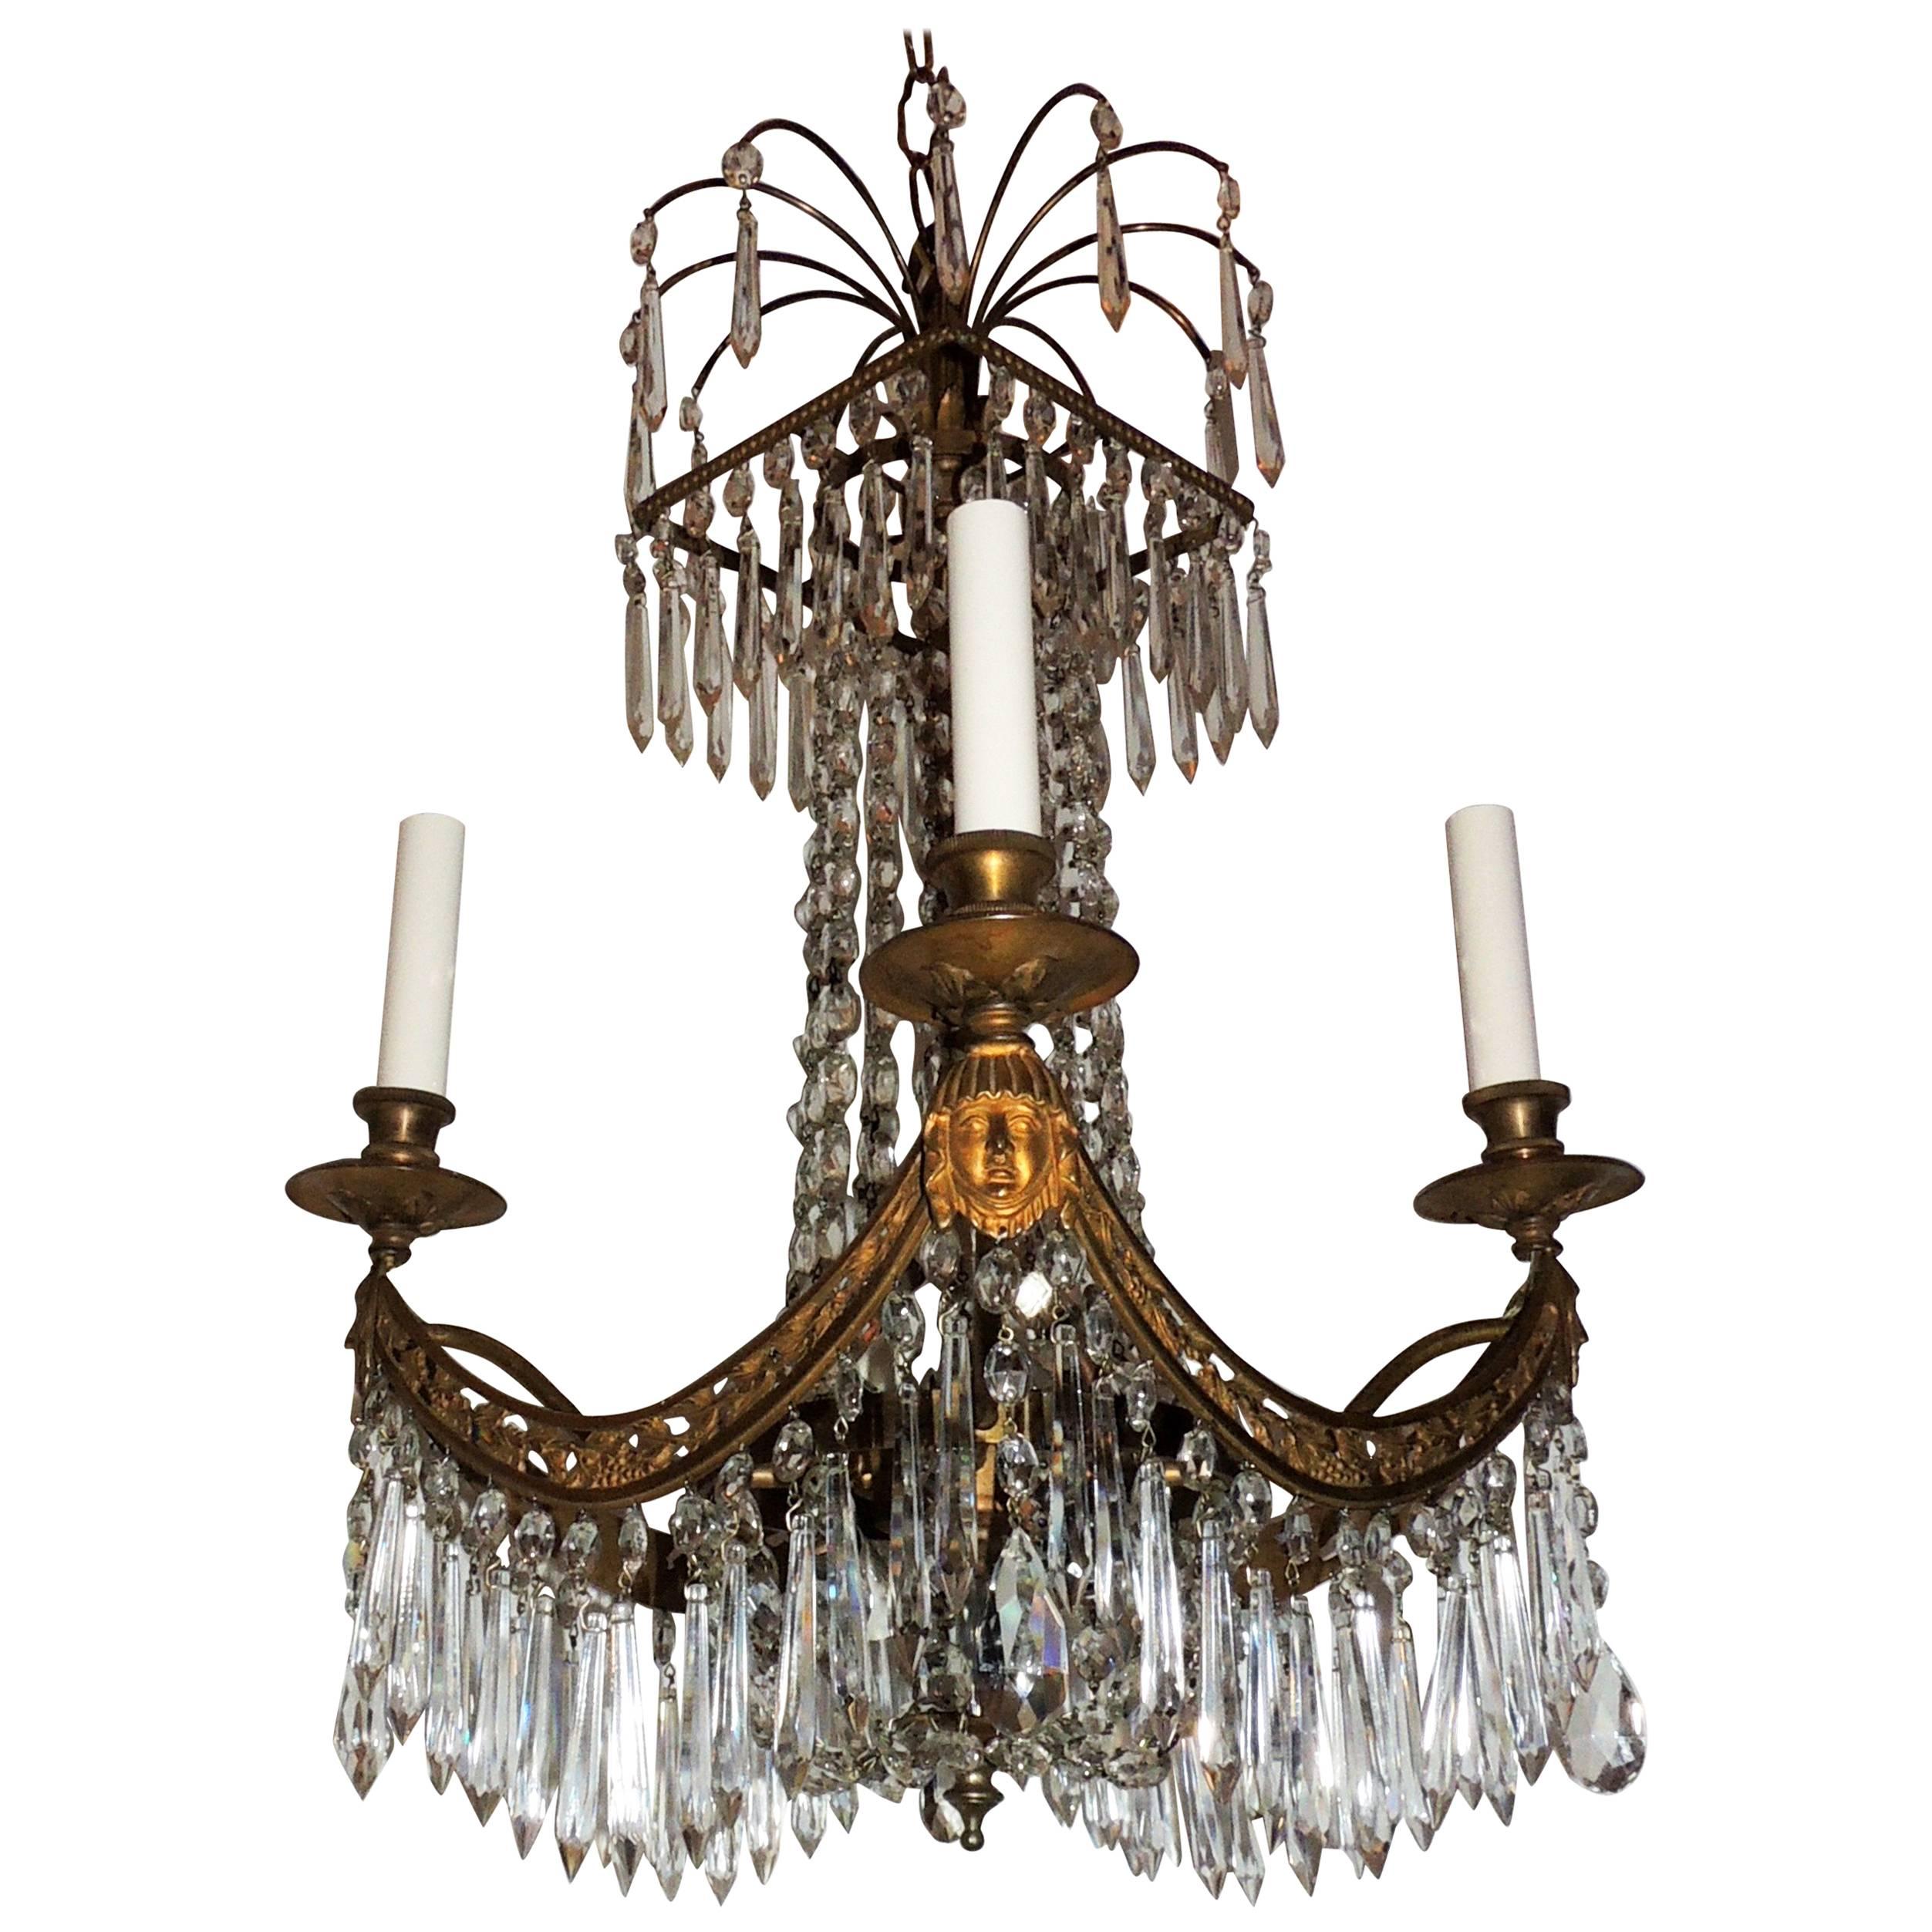 Fine French Bronze Neoclassical Baltic Empire Crystal Square Basket Chandelier 